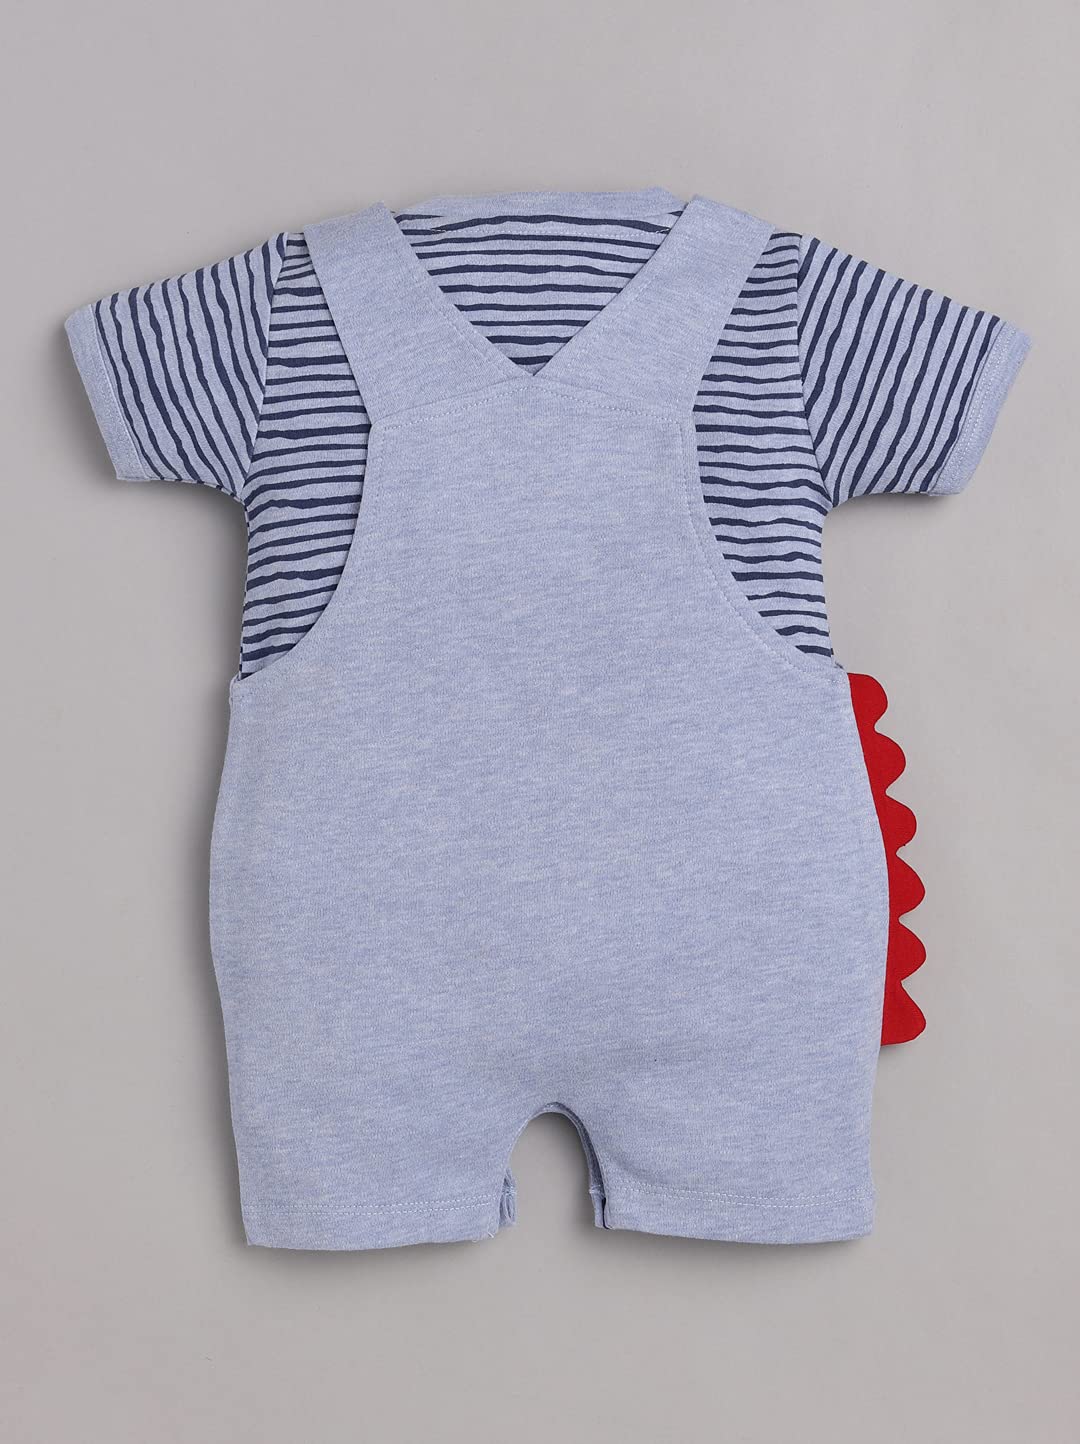 100% Pure Cotton Dungaree for Baby Boys-SKY